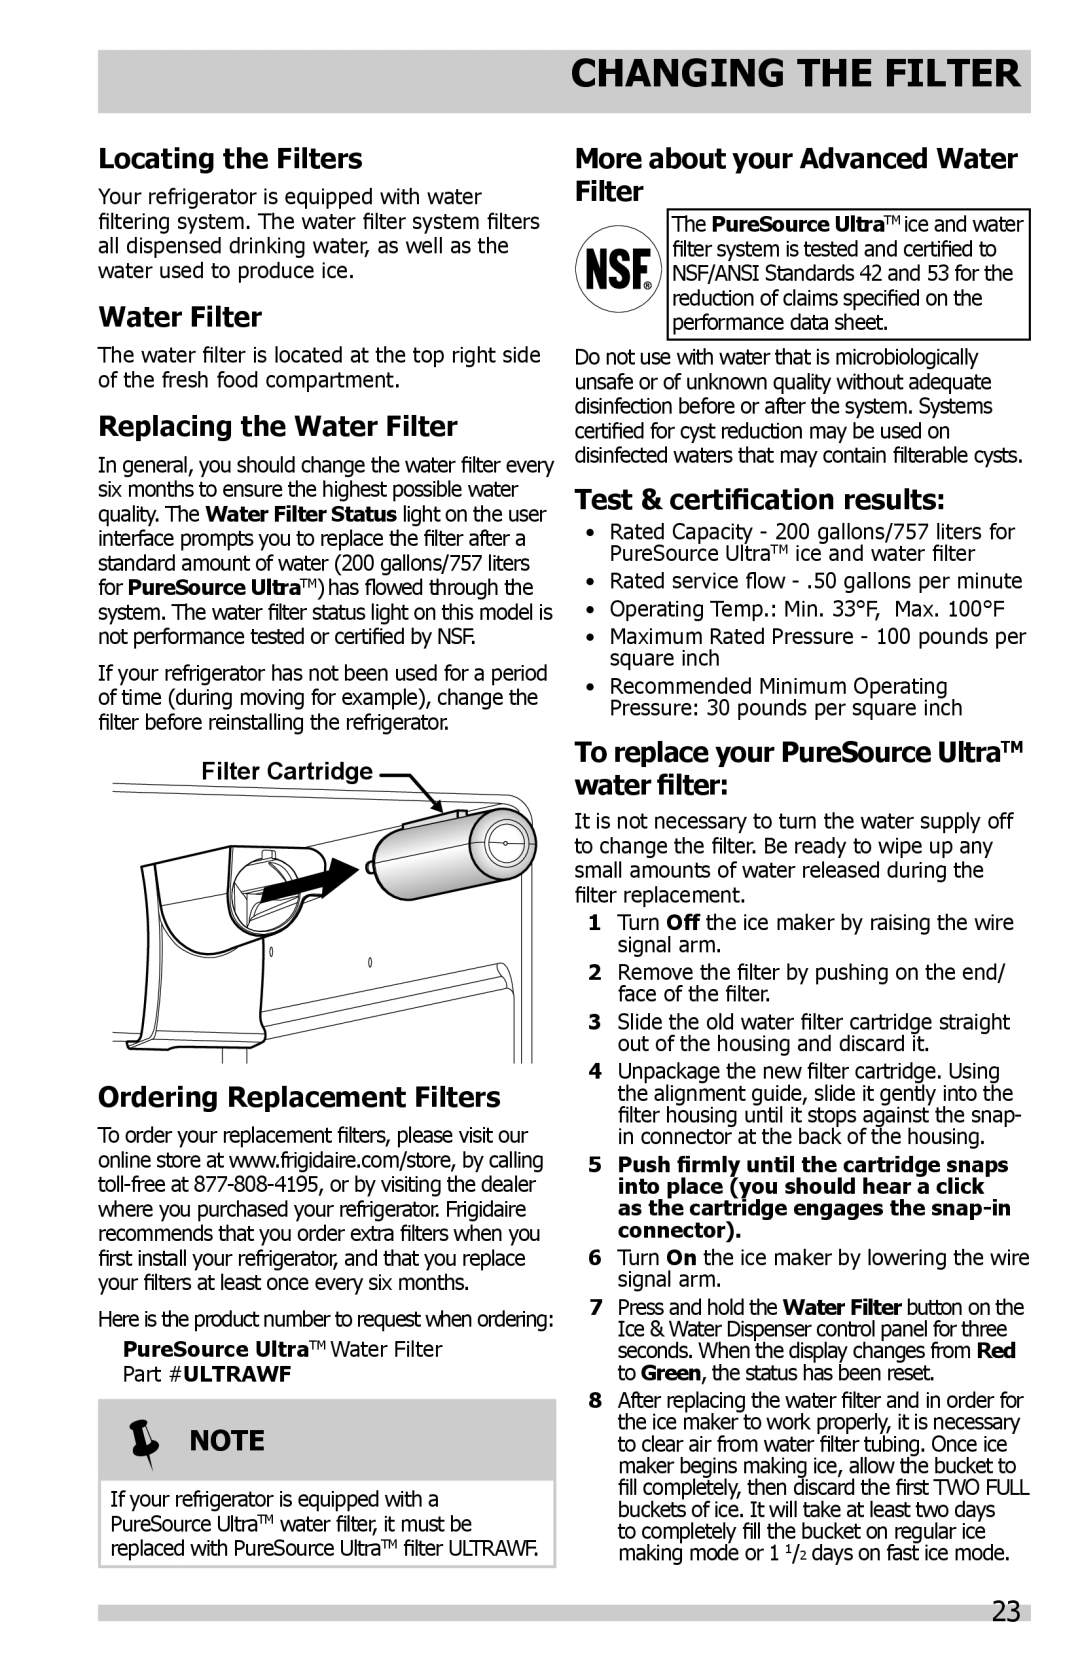 Frigidaire FPHG2399MF Changing The Filter, Locating the Filters, Replacing the Water Filter, Filter Cartridge,  Note 